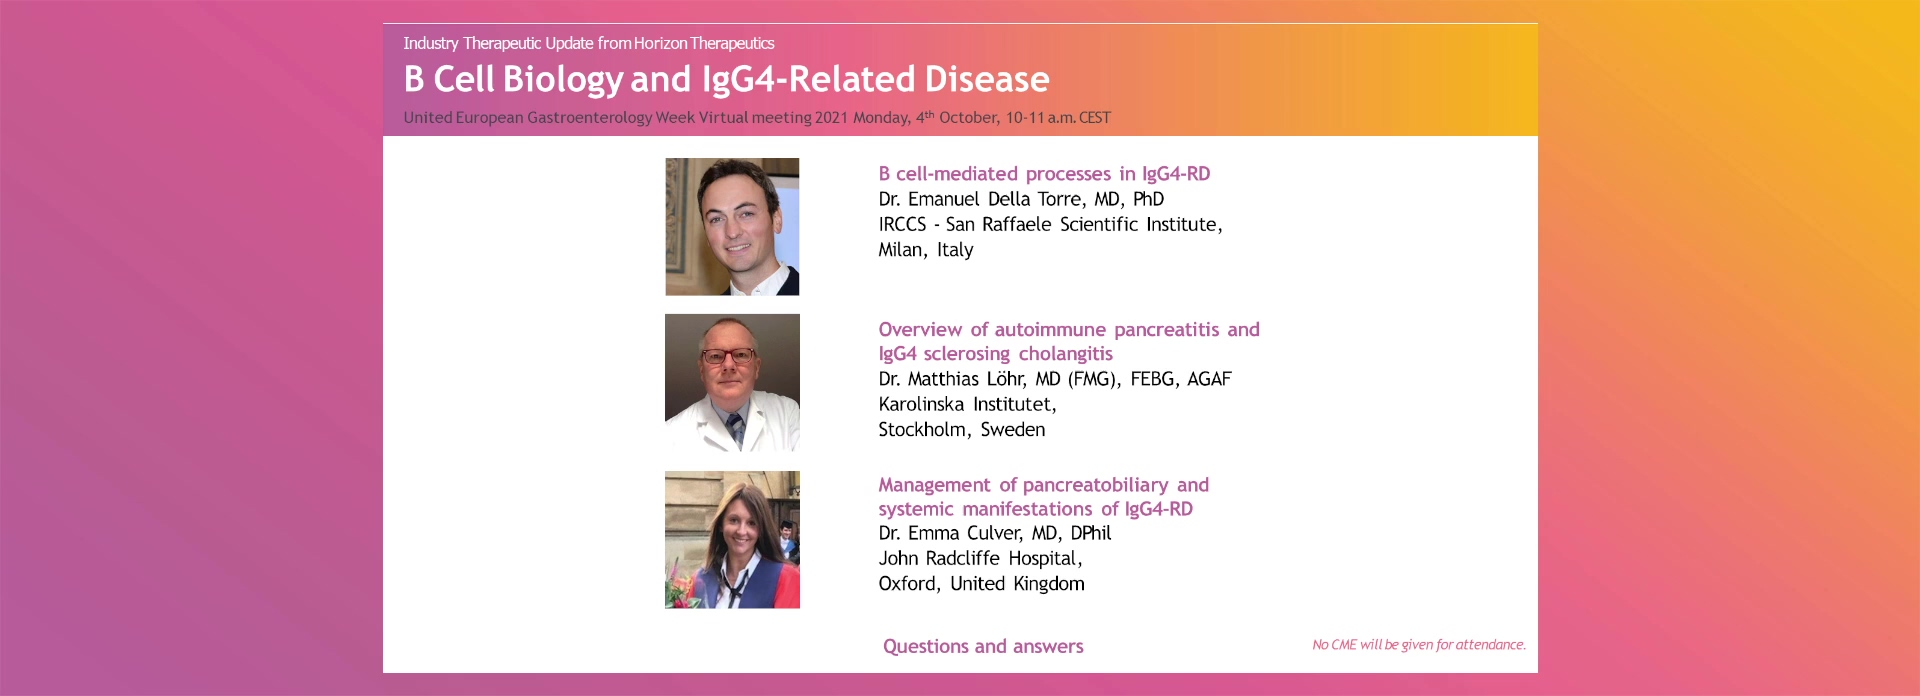 B cell Biology and IgG4-Related Disease (Horizon Therapeutics)